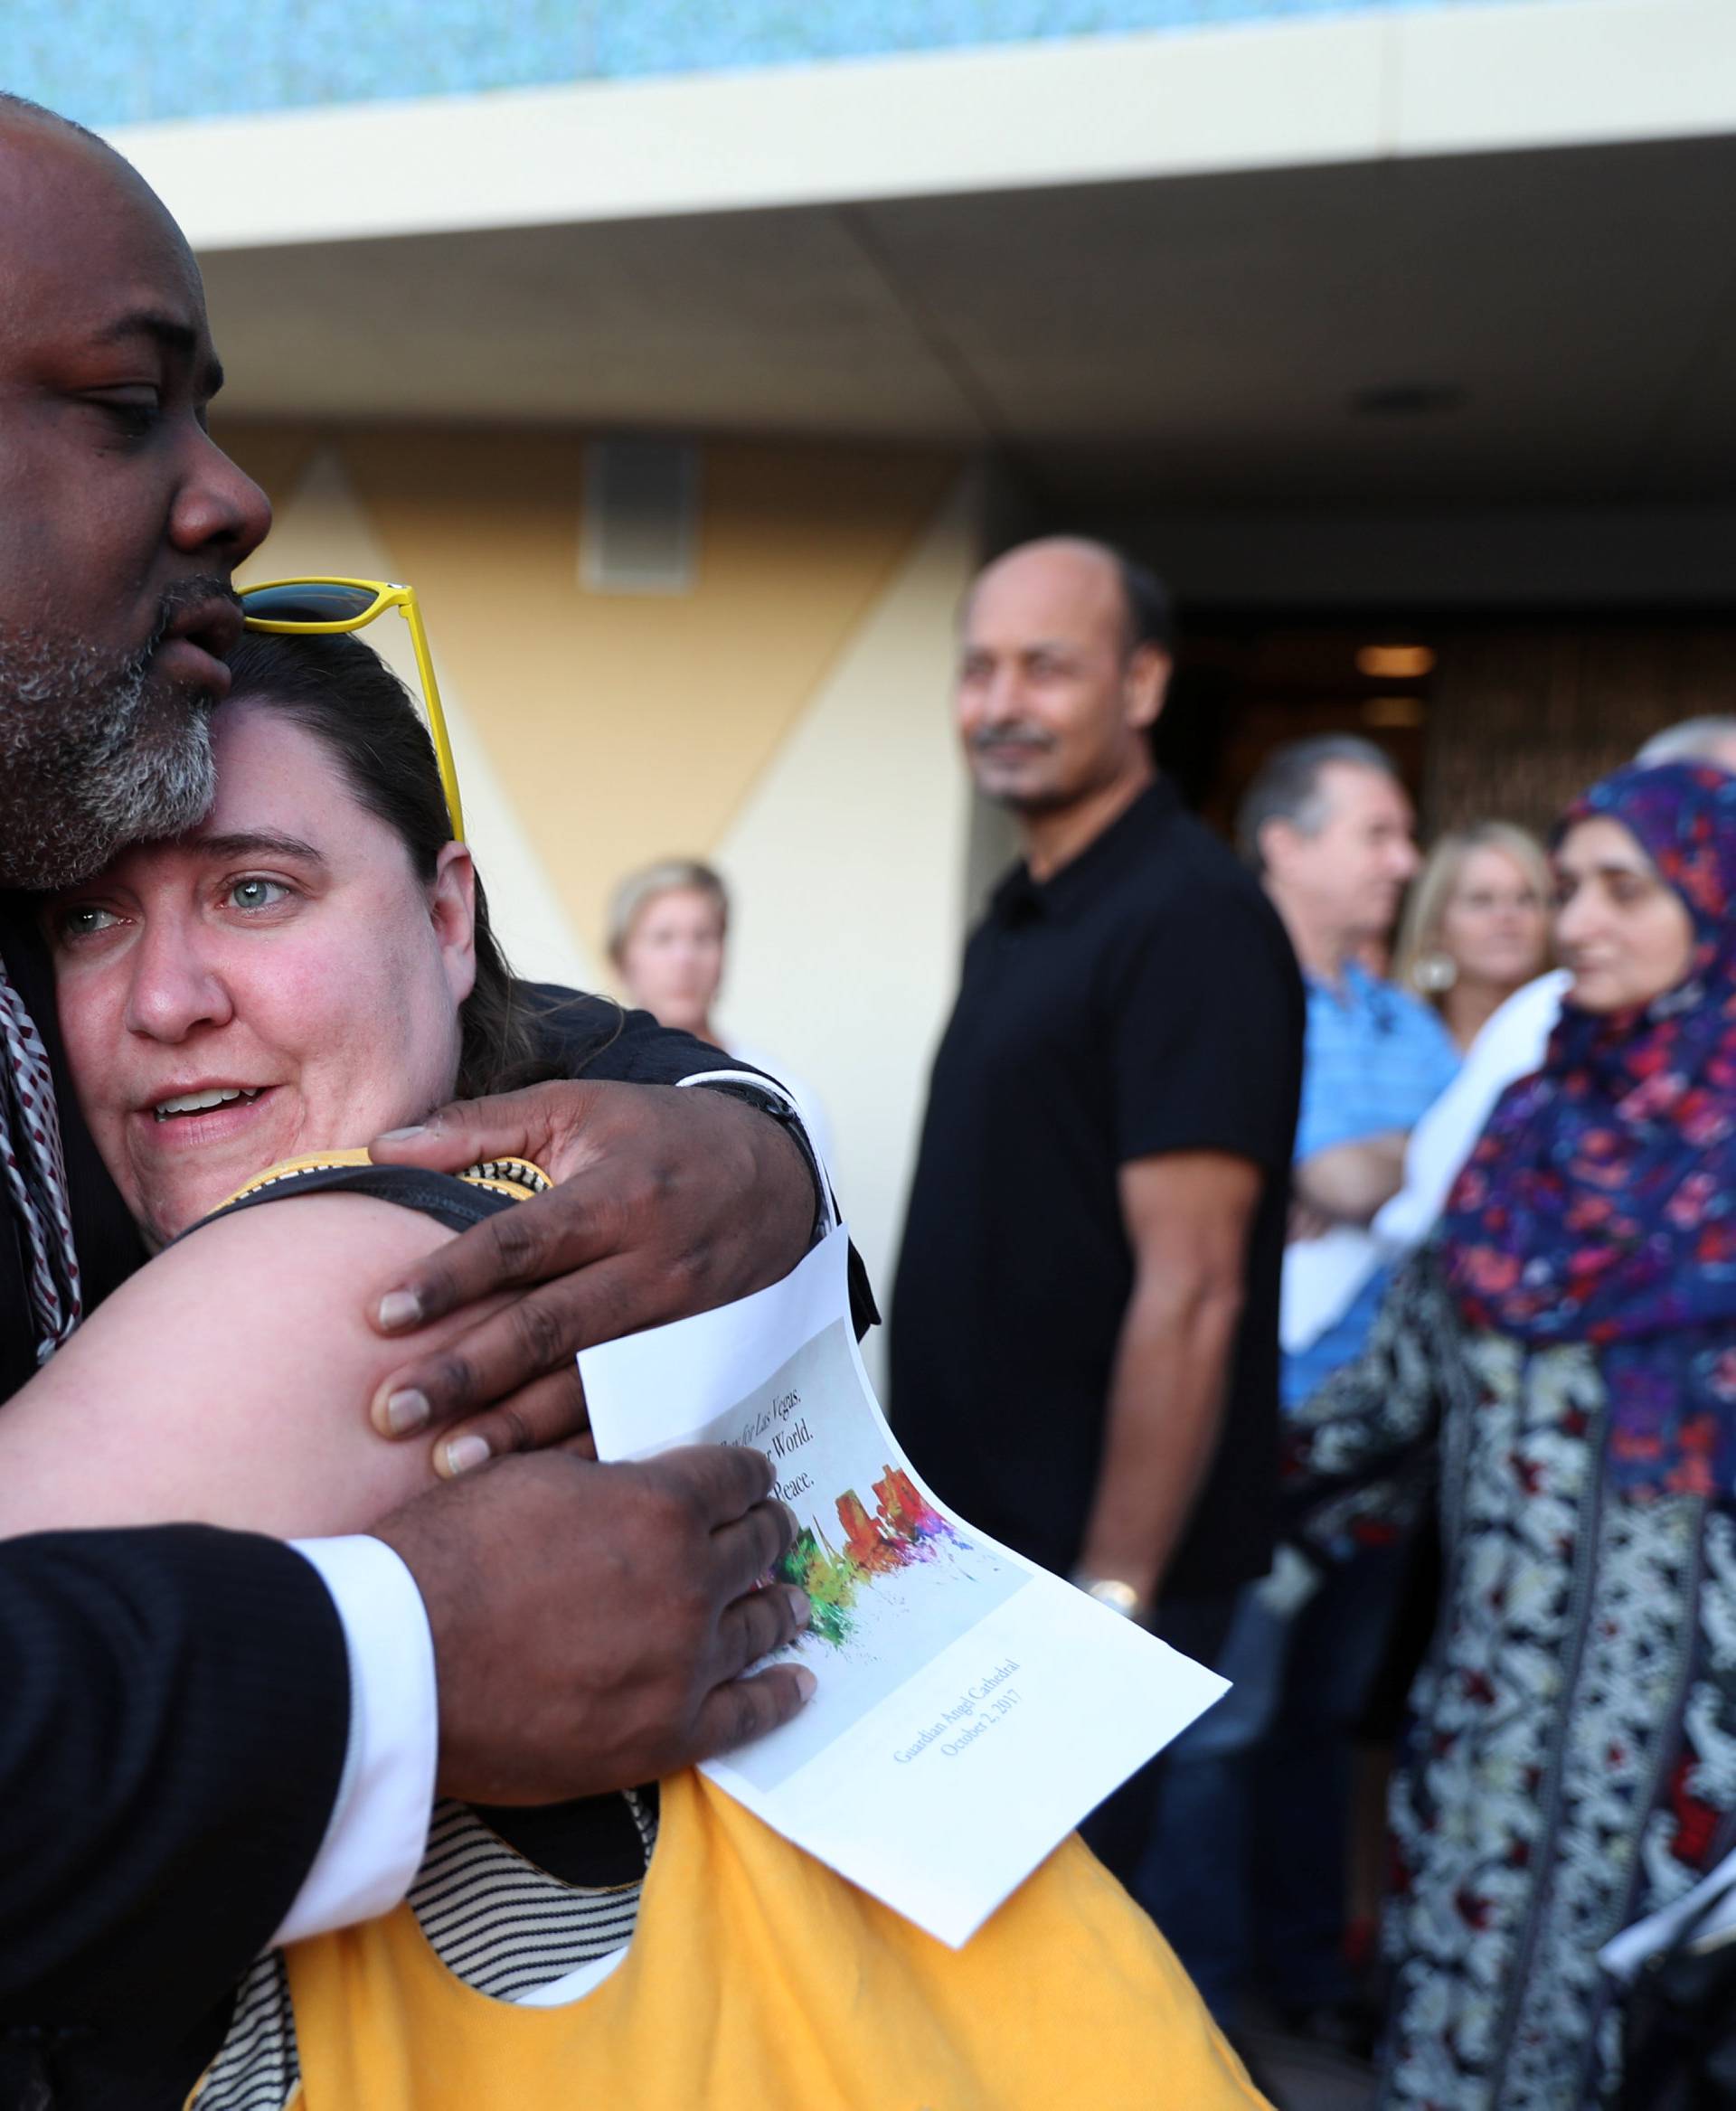 People mourn after an interfaith memorial service for victims of the Route 91 music festival mass shooting outside the Mandalay Bay Resort and Casino in Las Vegas